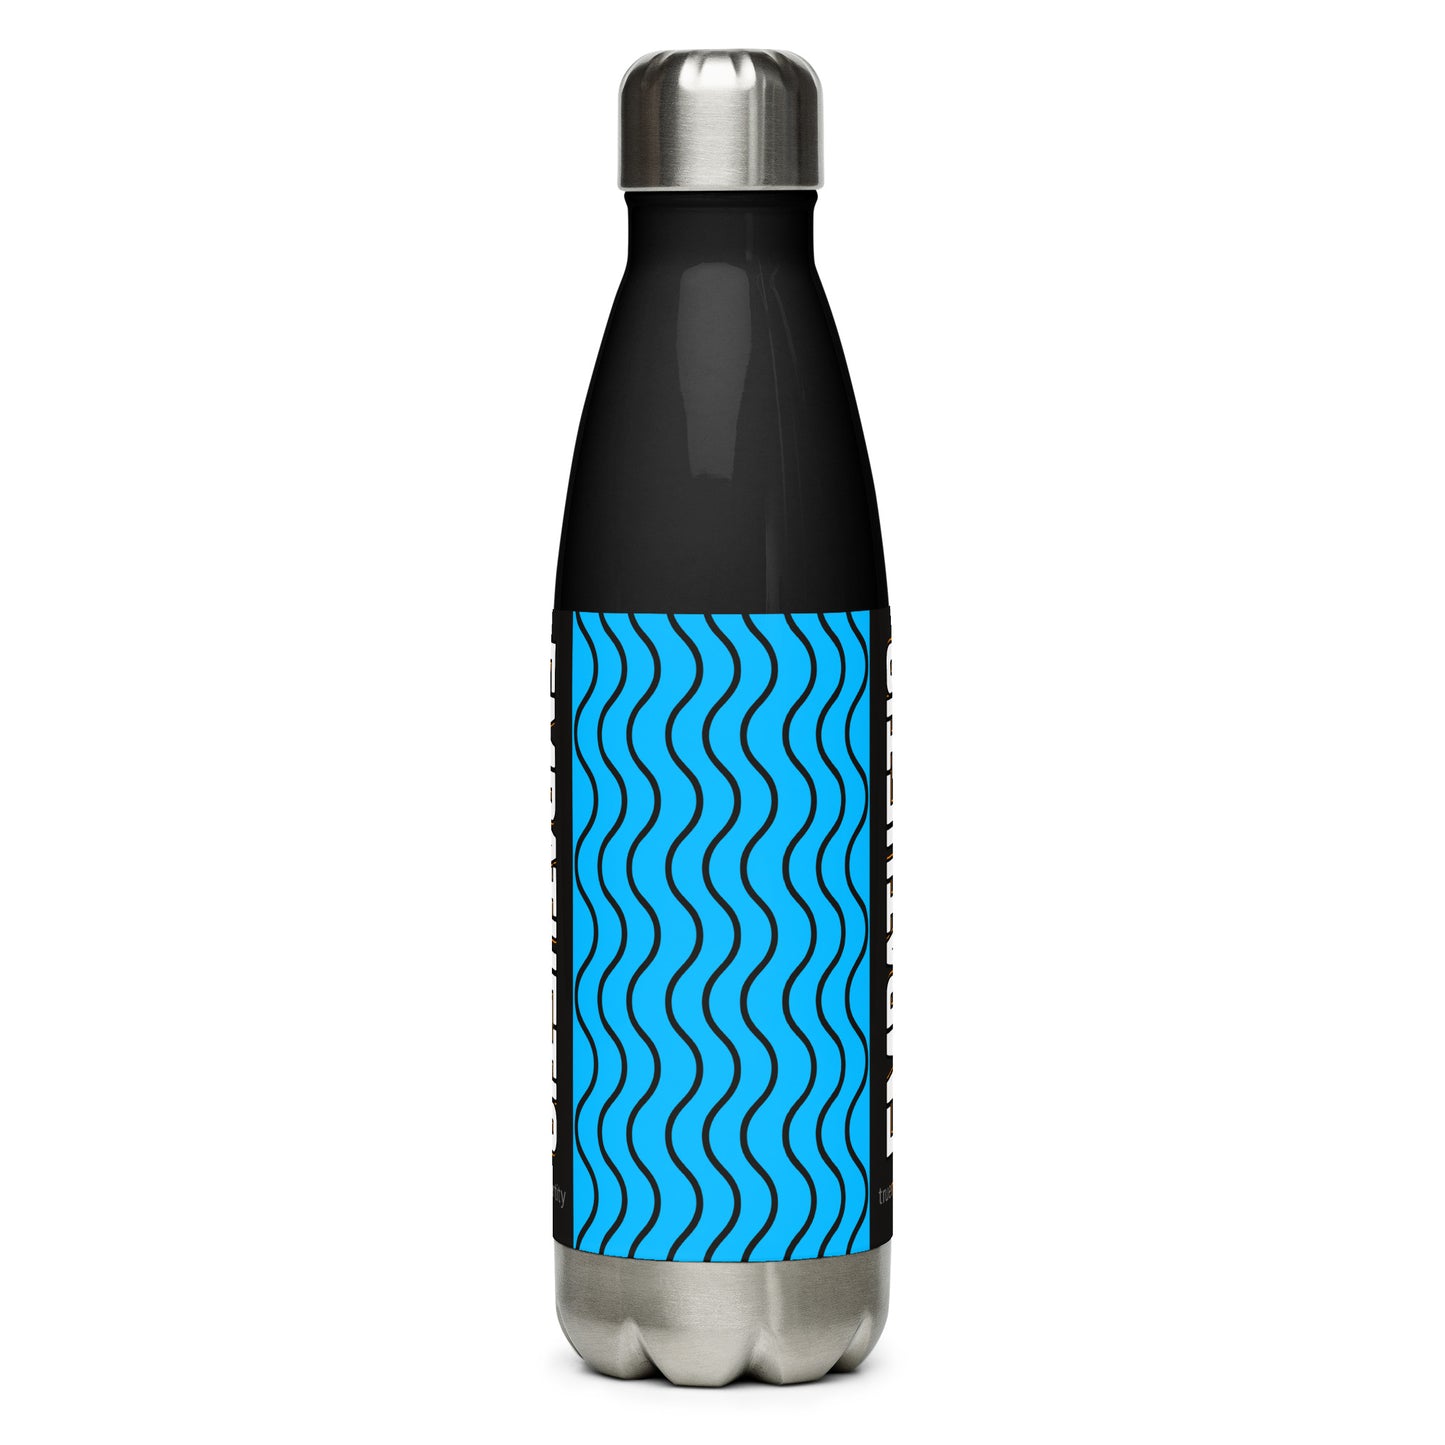 EMPATHETIC Stainless Steel Water Bottle Blue Wave Design, 17 oz, in Black or White